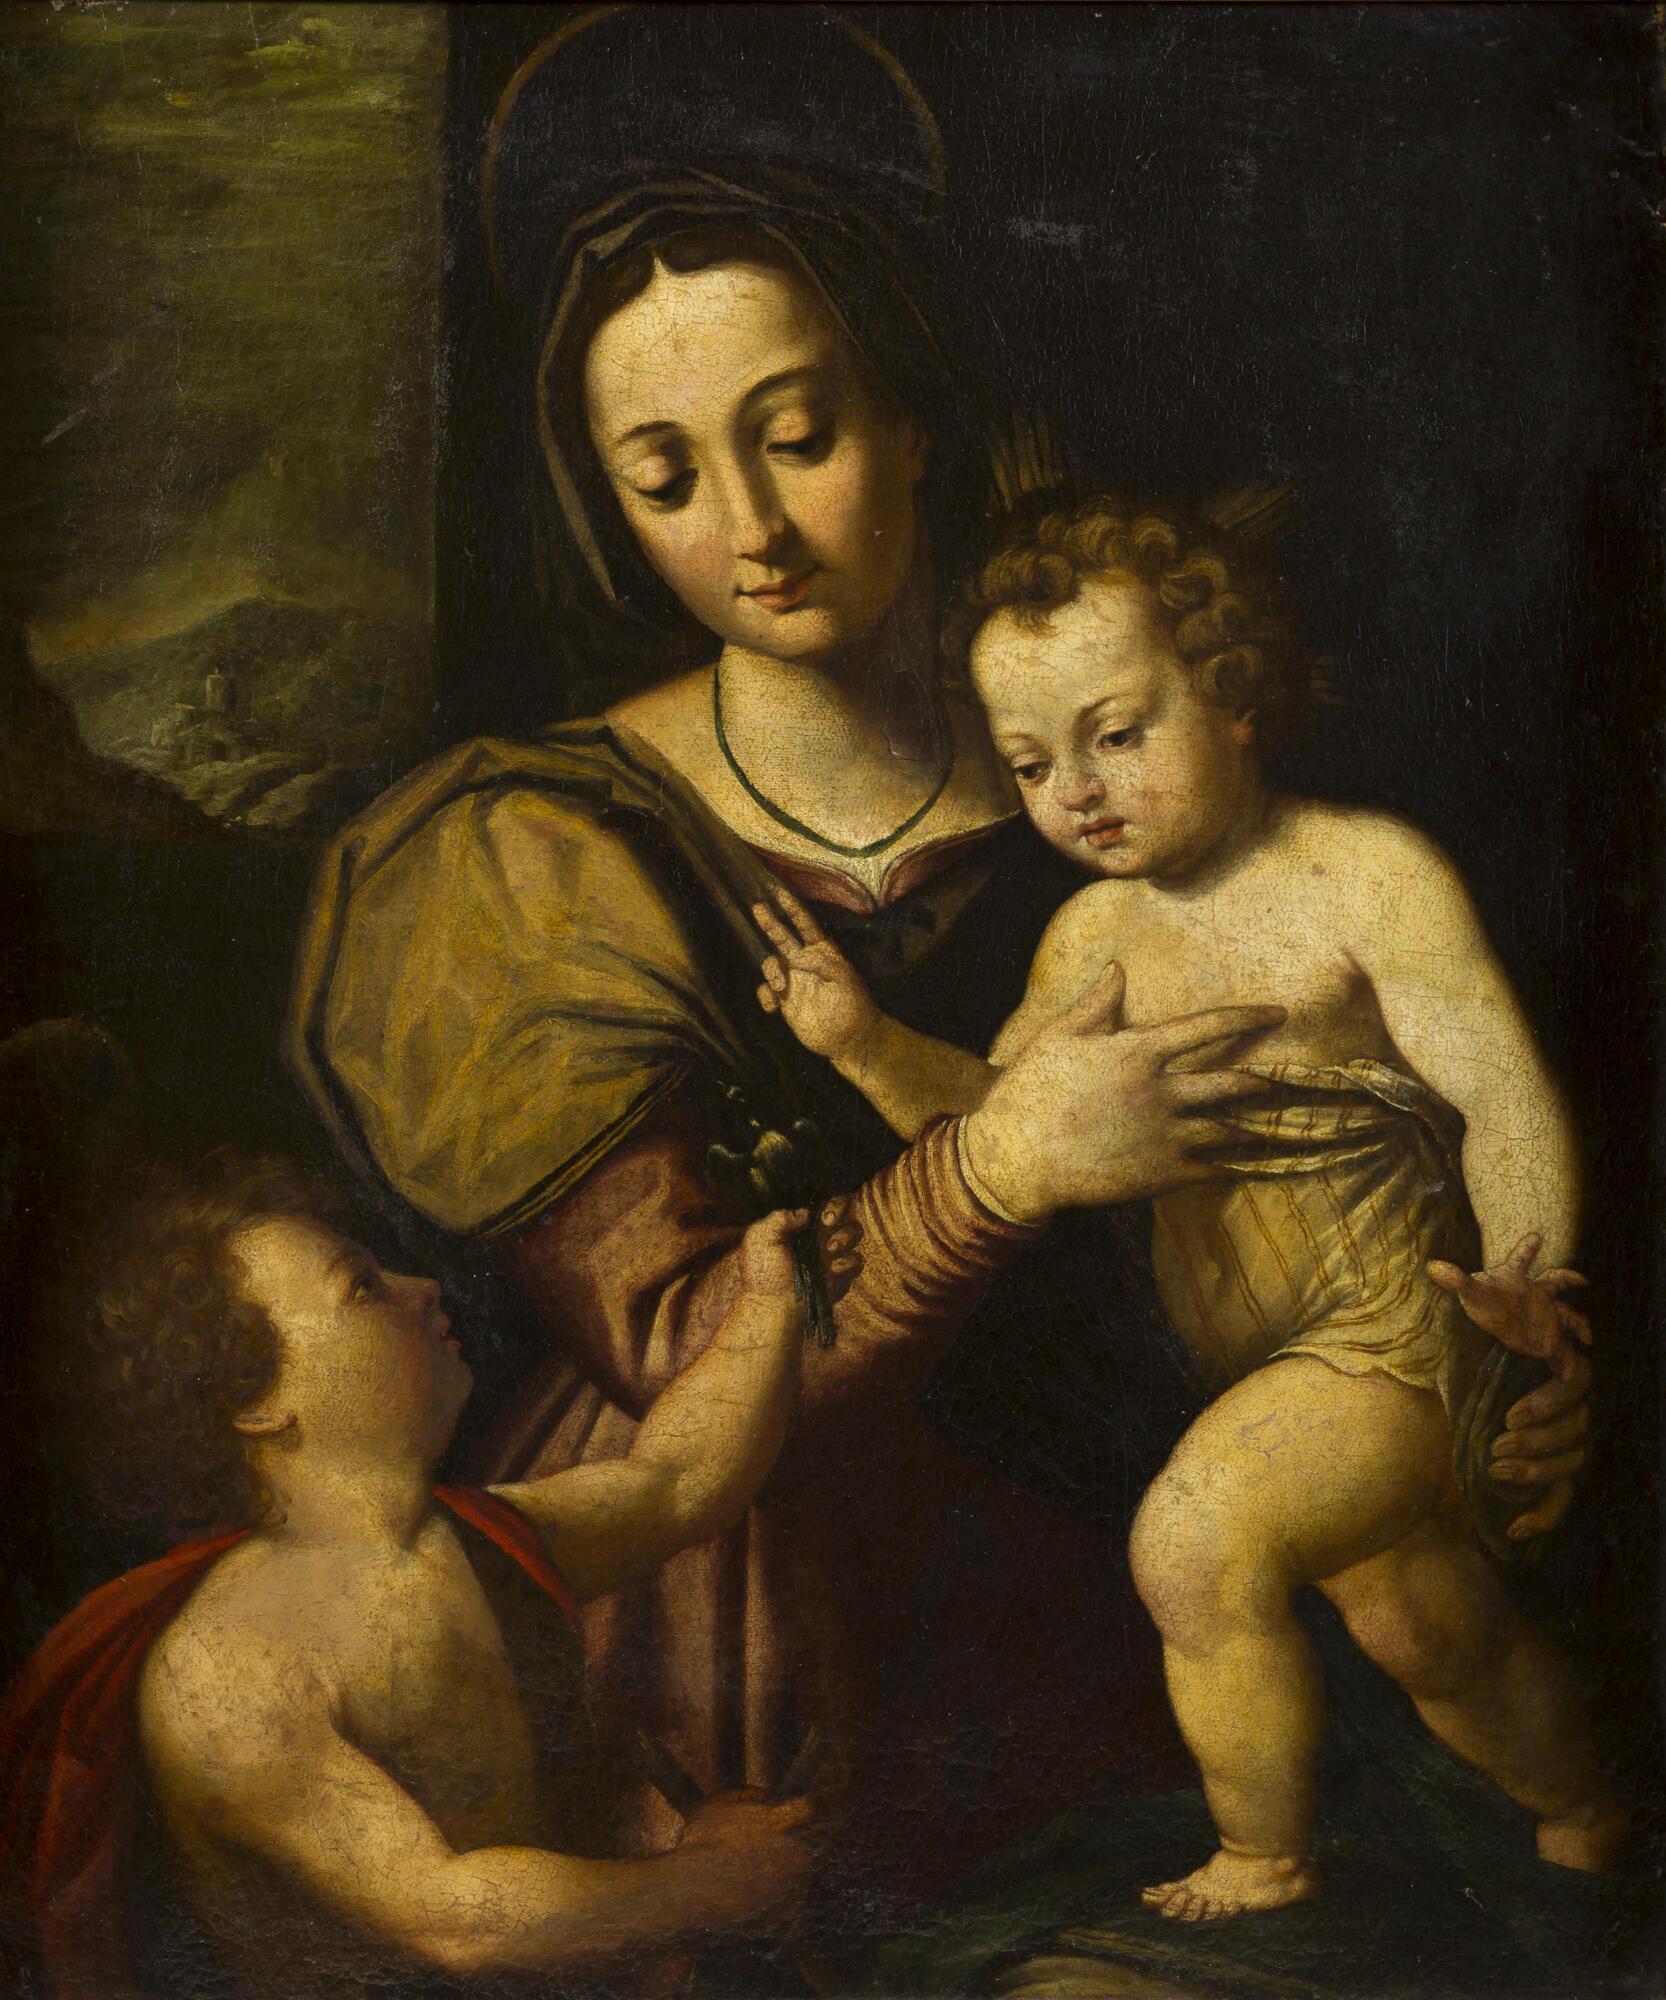 Three figures, one woman with two children, one is holding a bird.